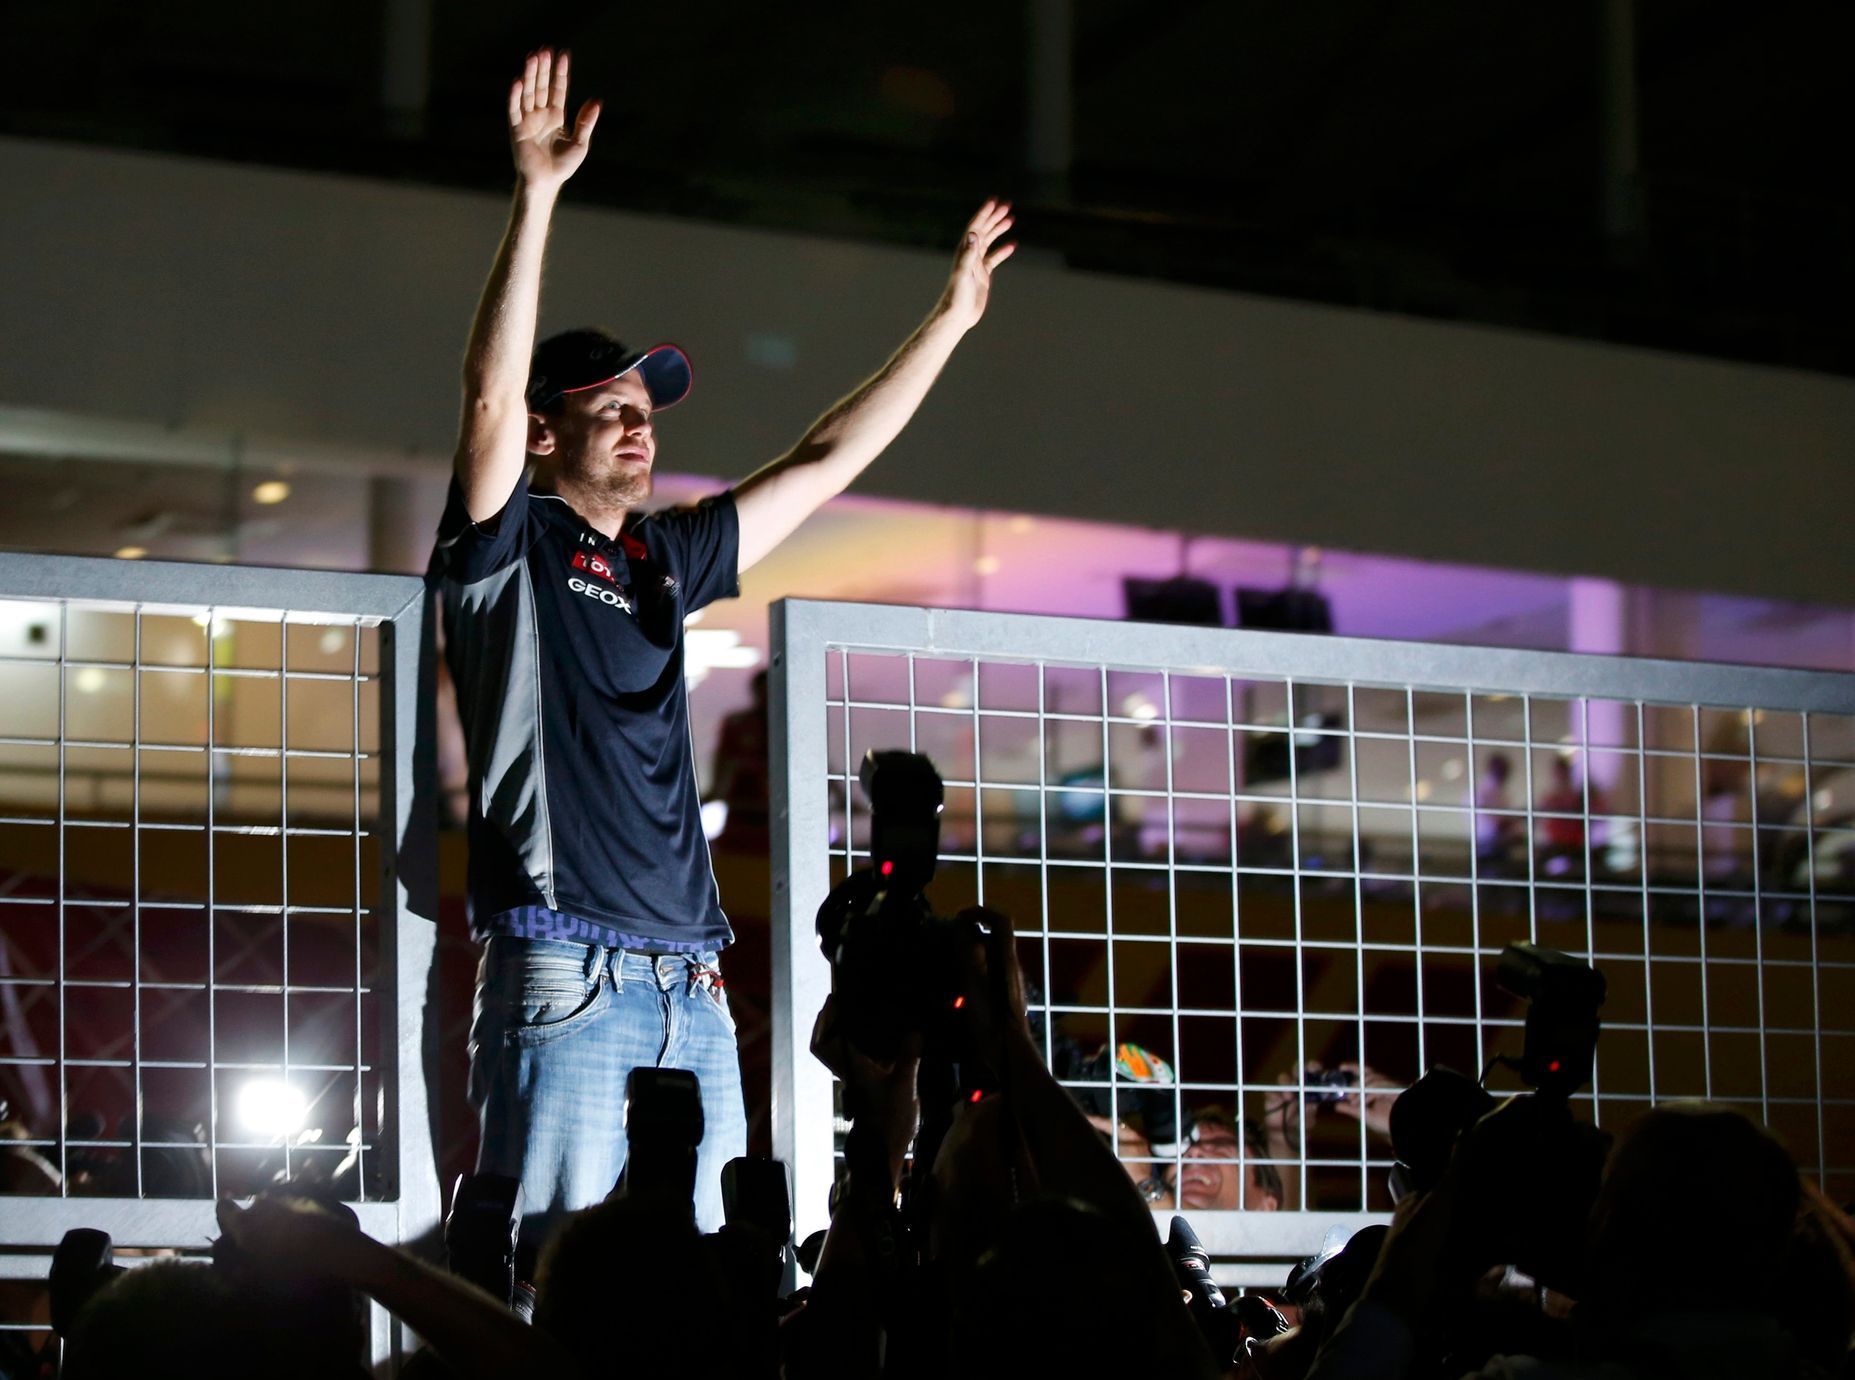 Red Bull Formula One driver Vettel of Germany waves to fans after winning the Japanese F1 Grand Prix at the Suzuka circuit